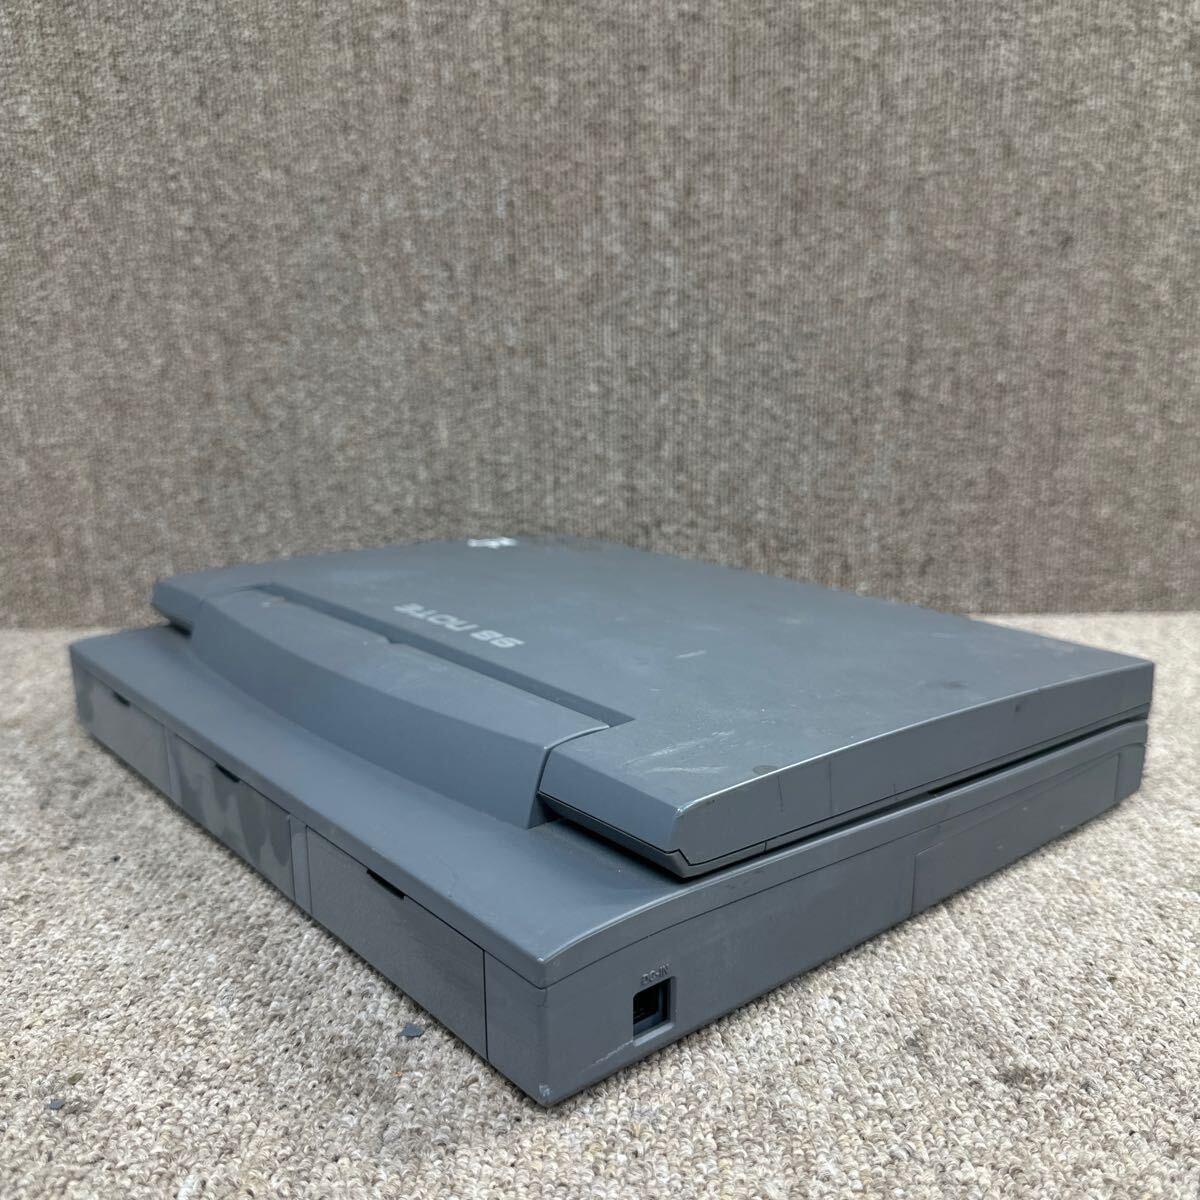 PCN98-1921 super-discount PC98 notebook NEC 98note PC-9821Nm electrification only has confirmed Junk including in a package possibility 